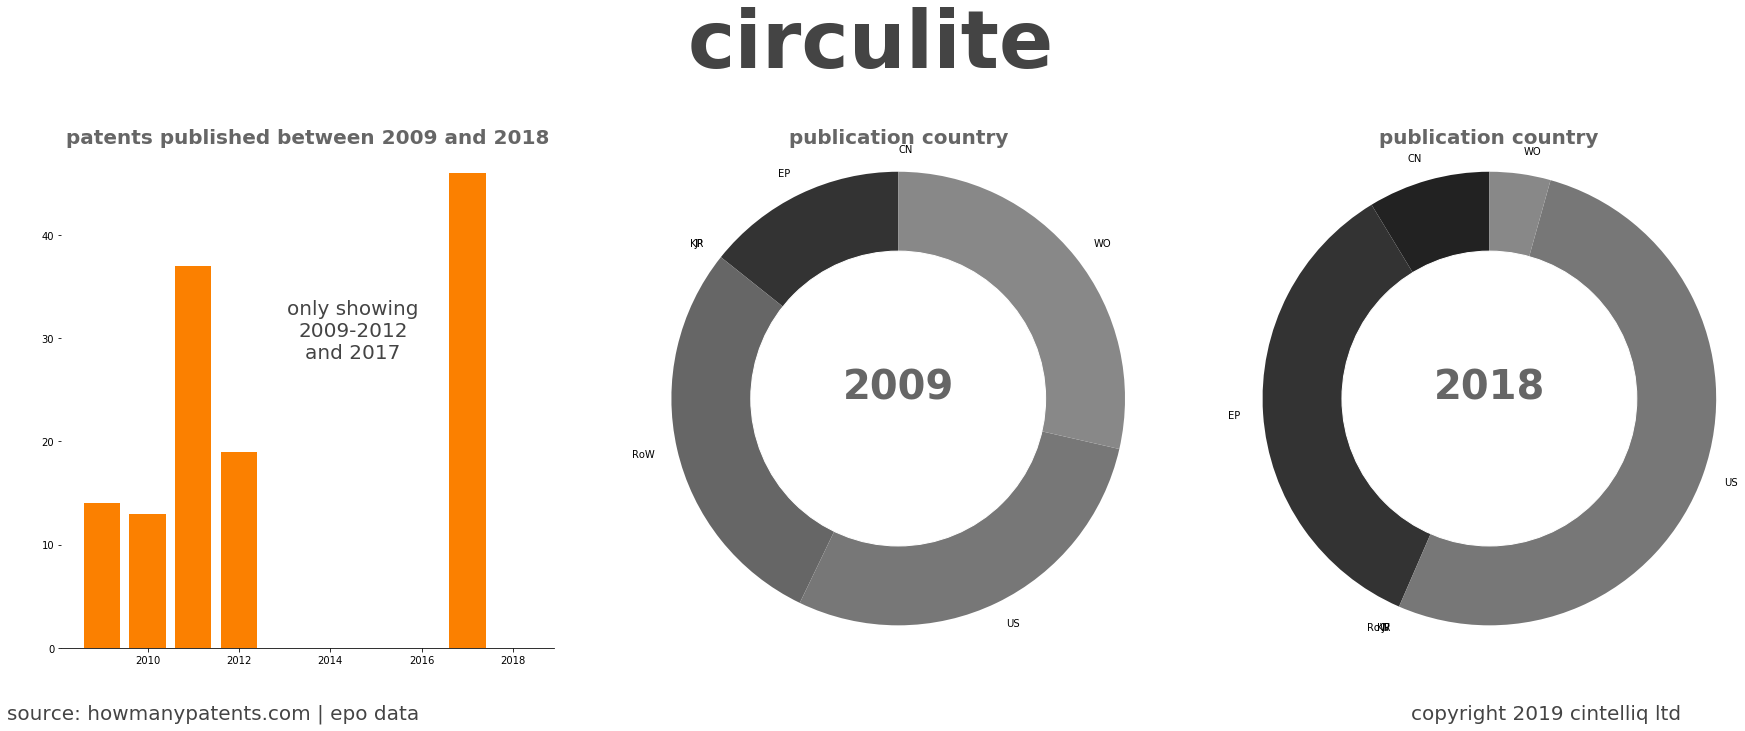 summary of patents for Circulite